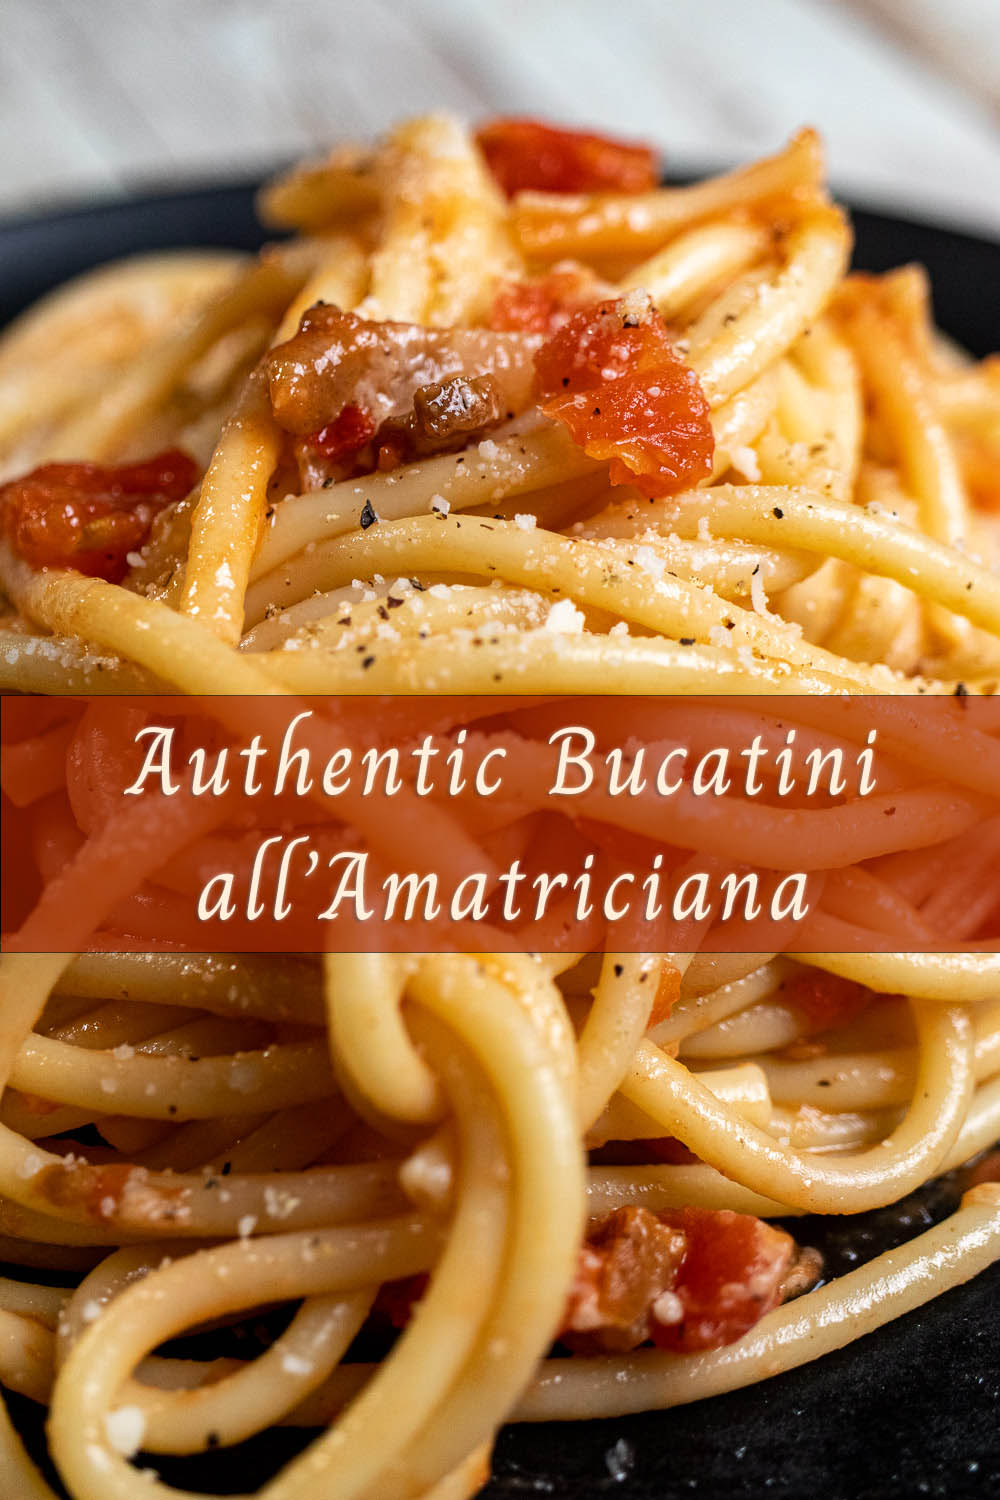 Authentic bucatini all' amatriciana served on a black plate.